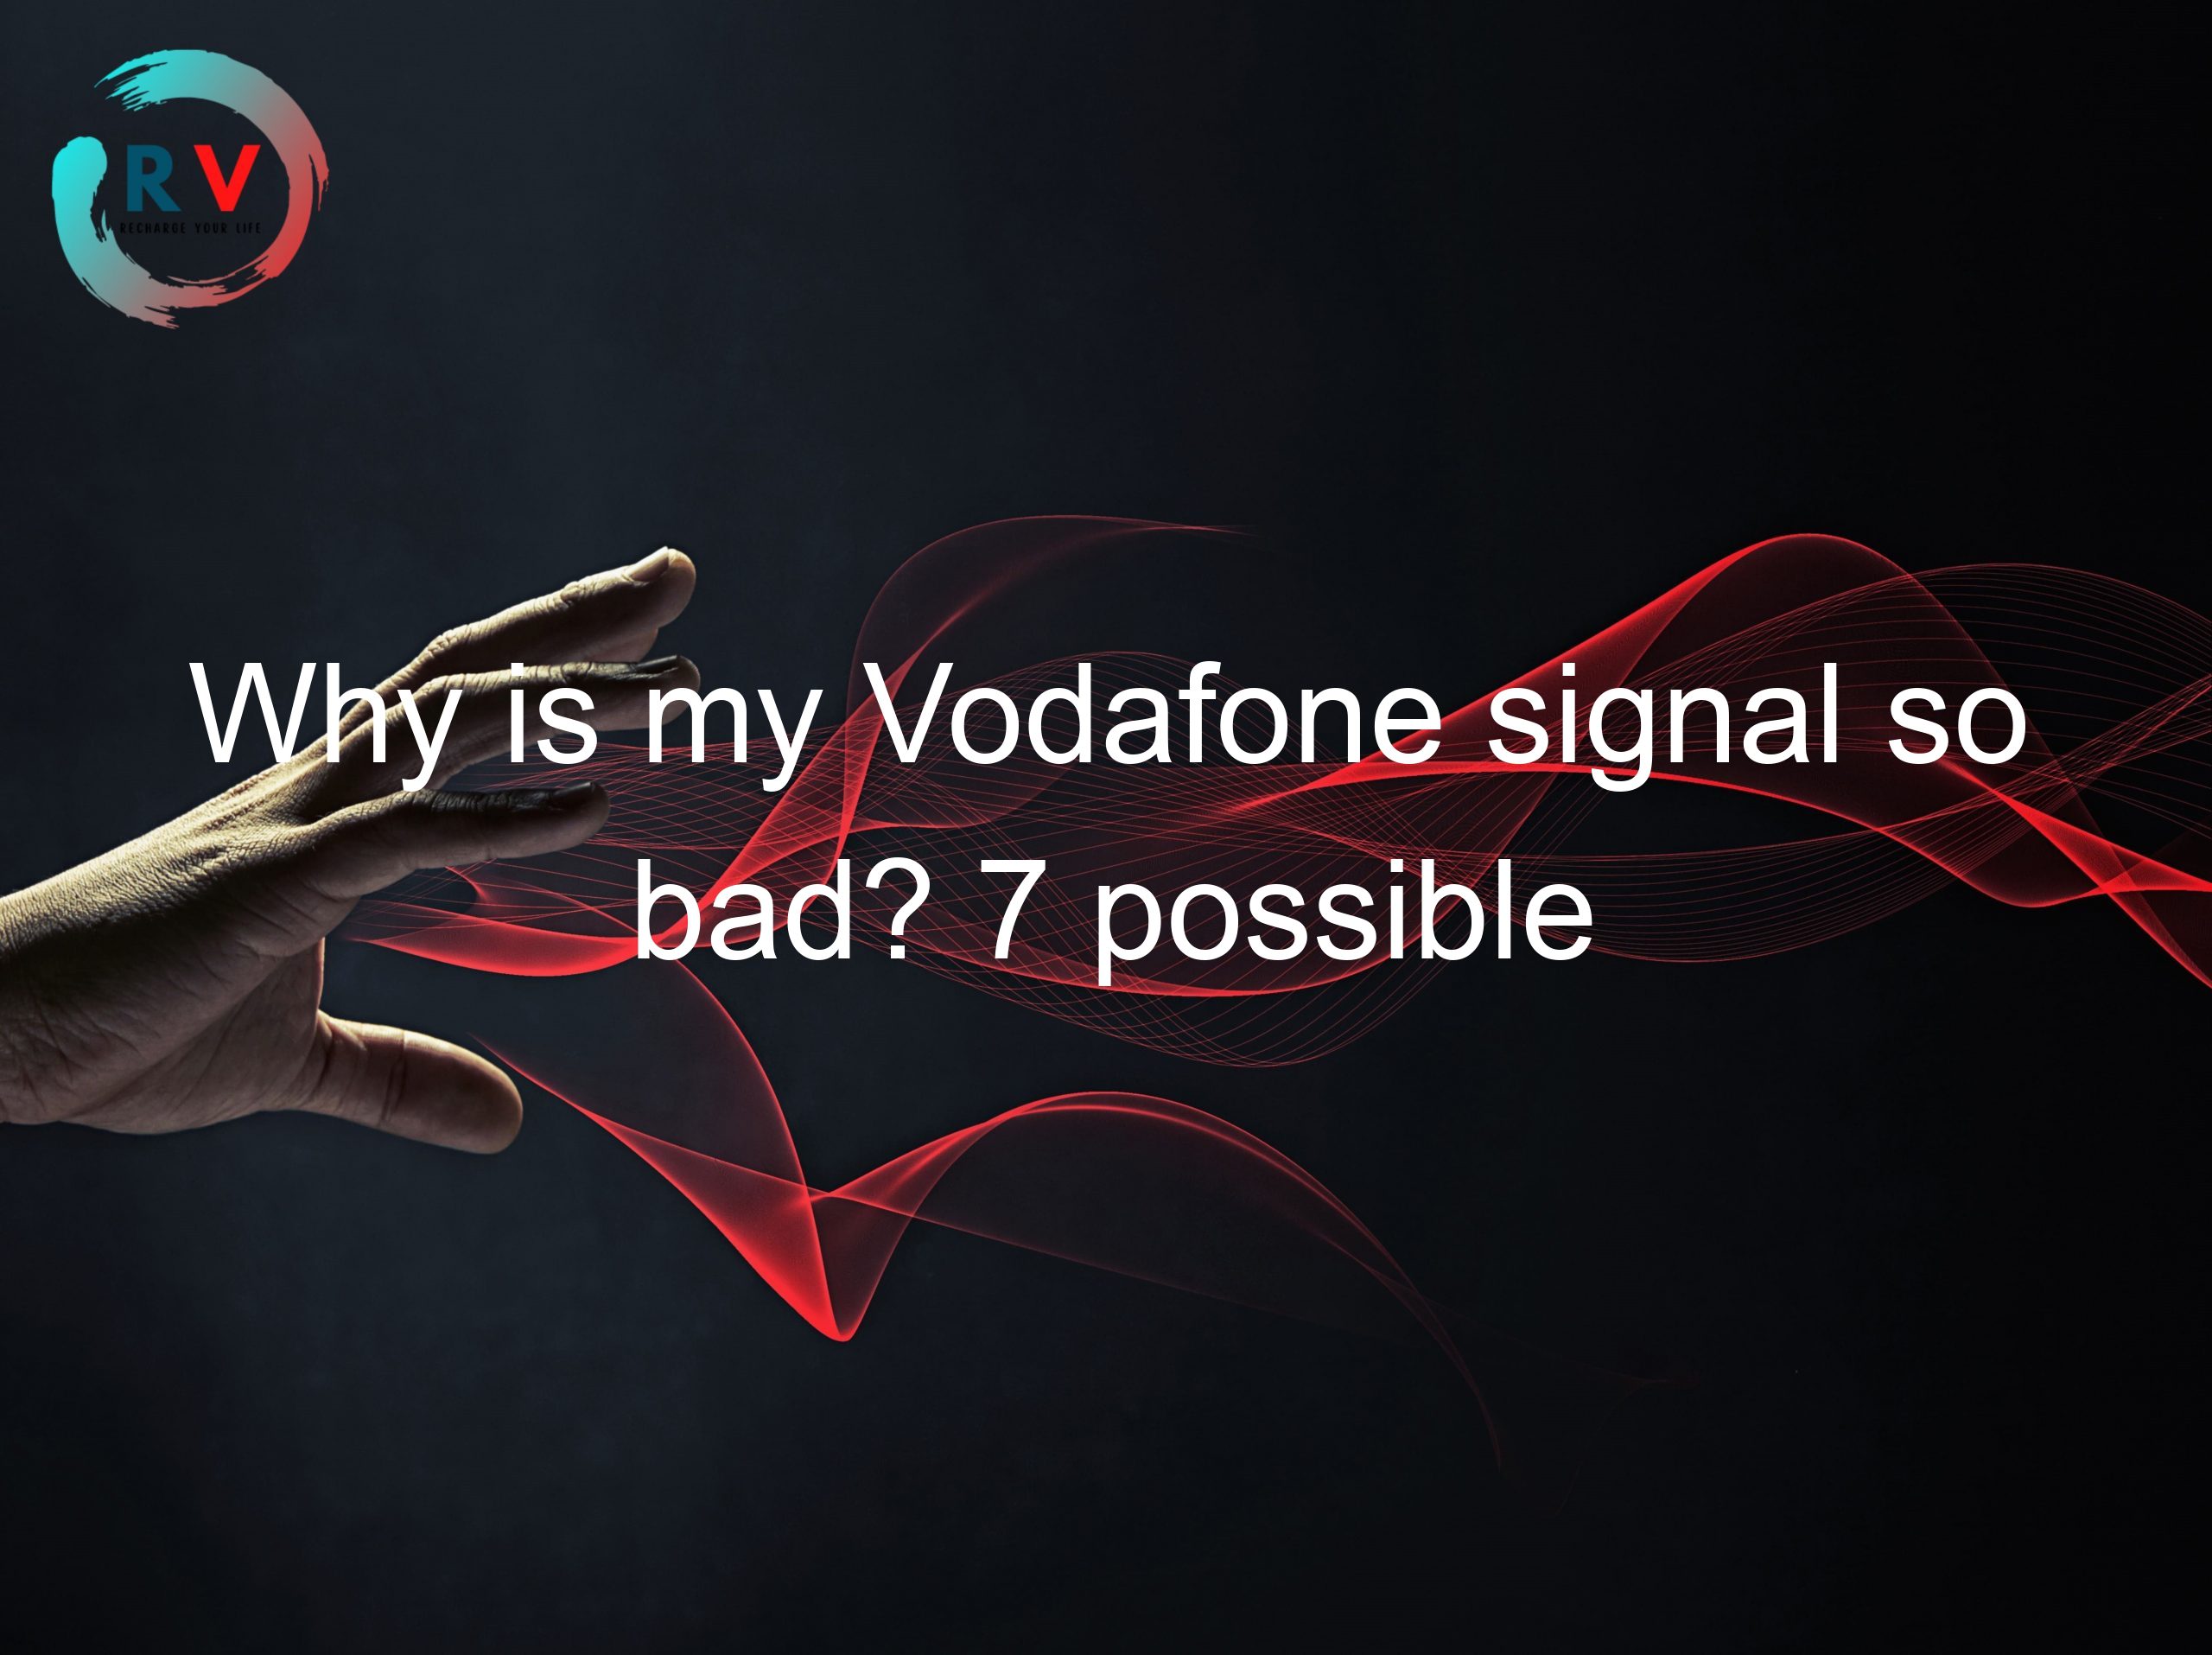 Why is my Vodafone signal so bad? 7 possible reasons (and how to fix them)